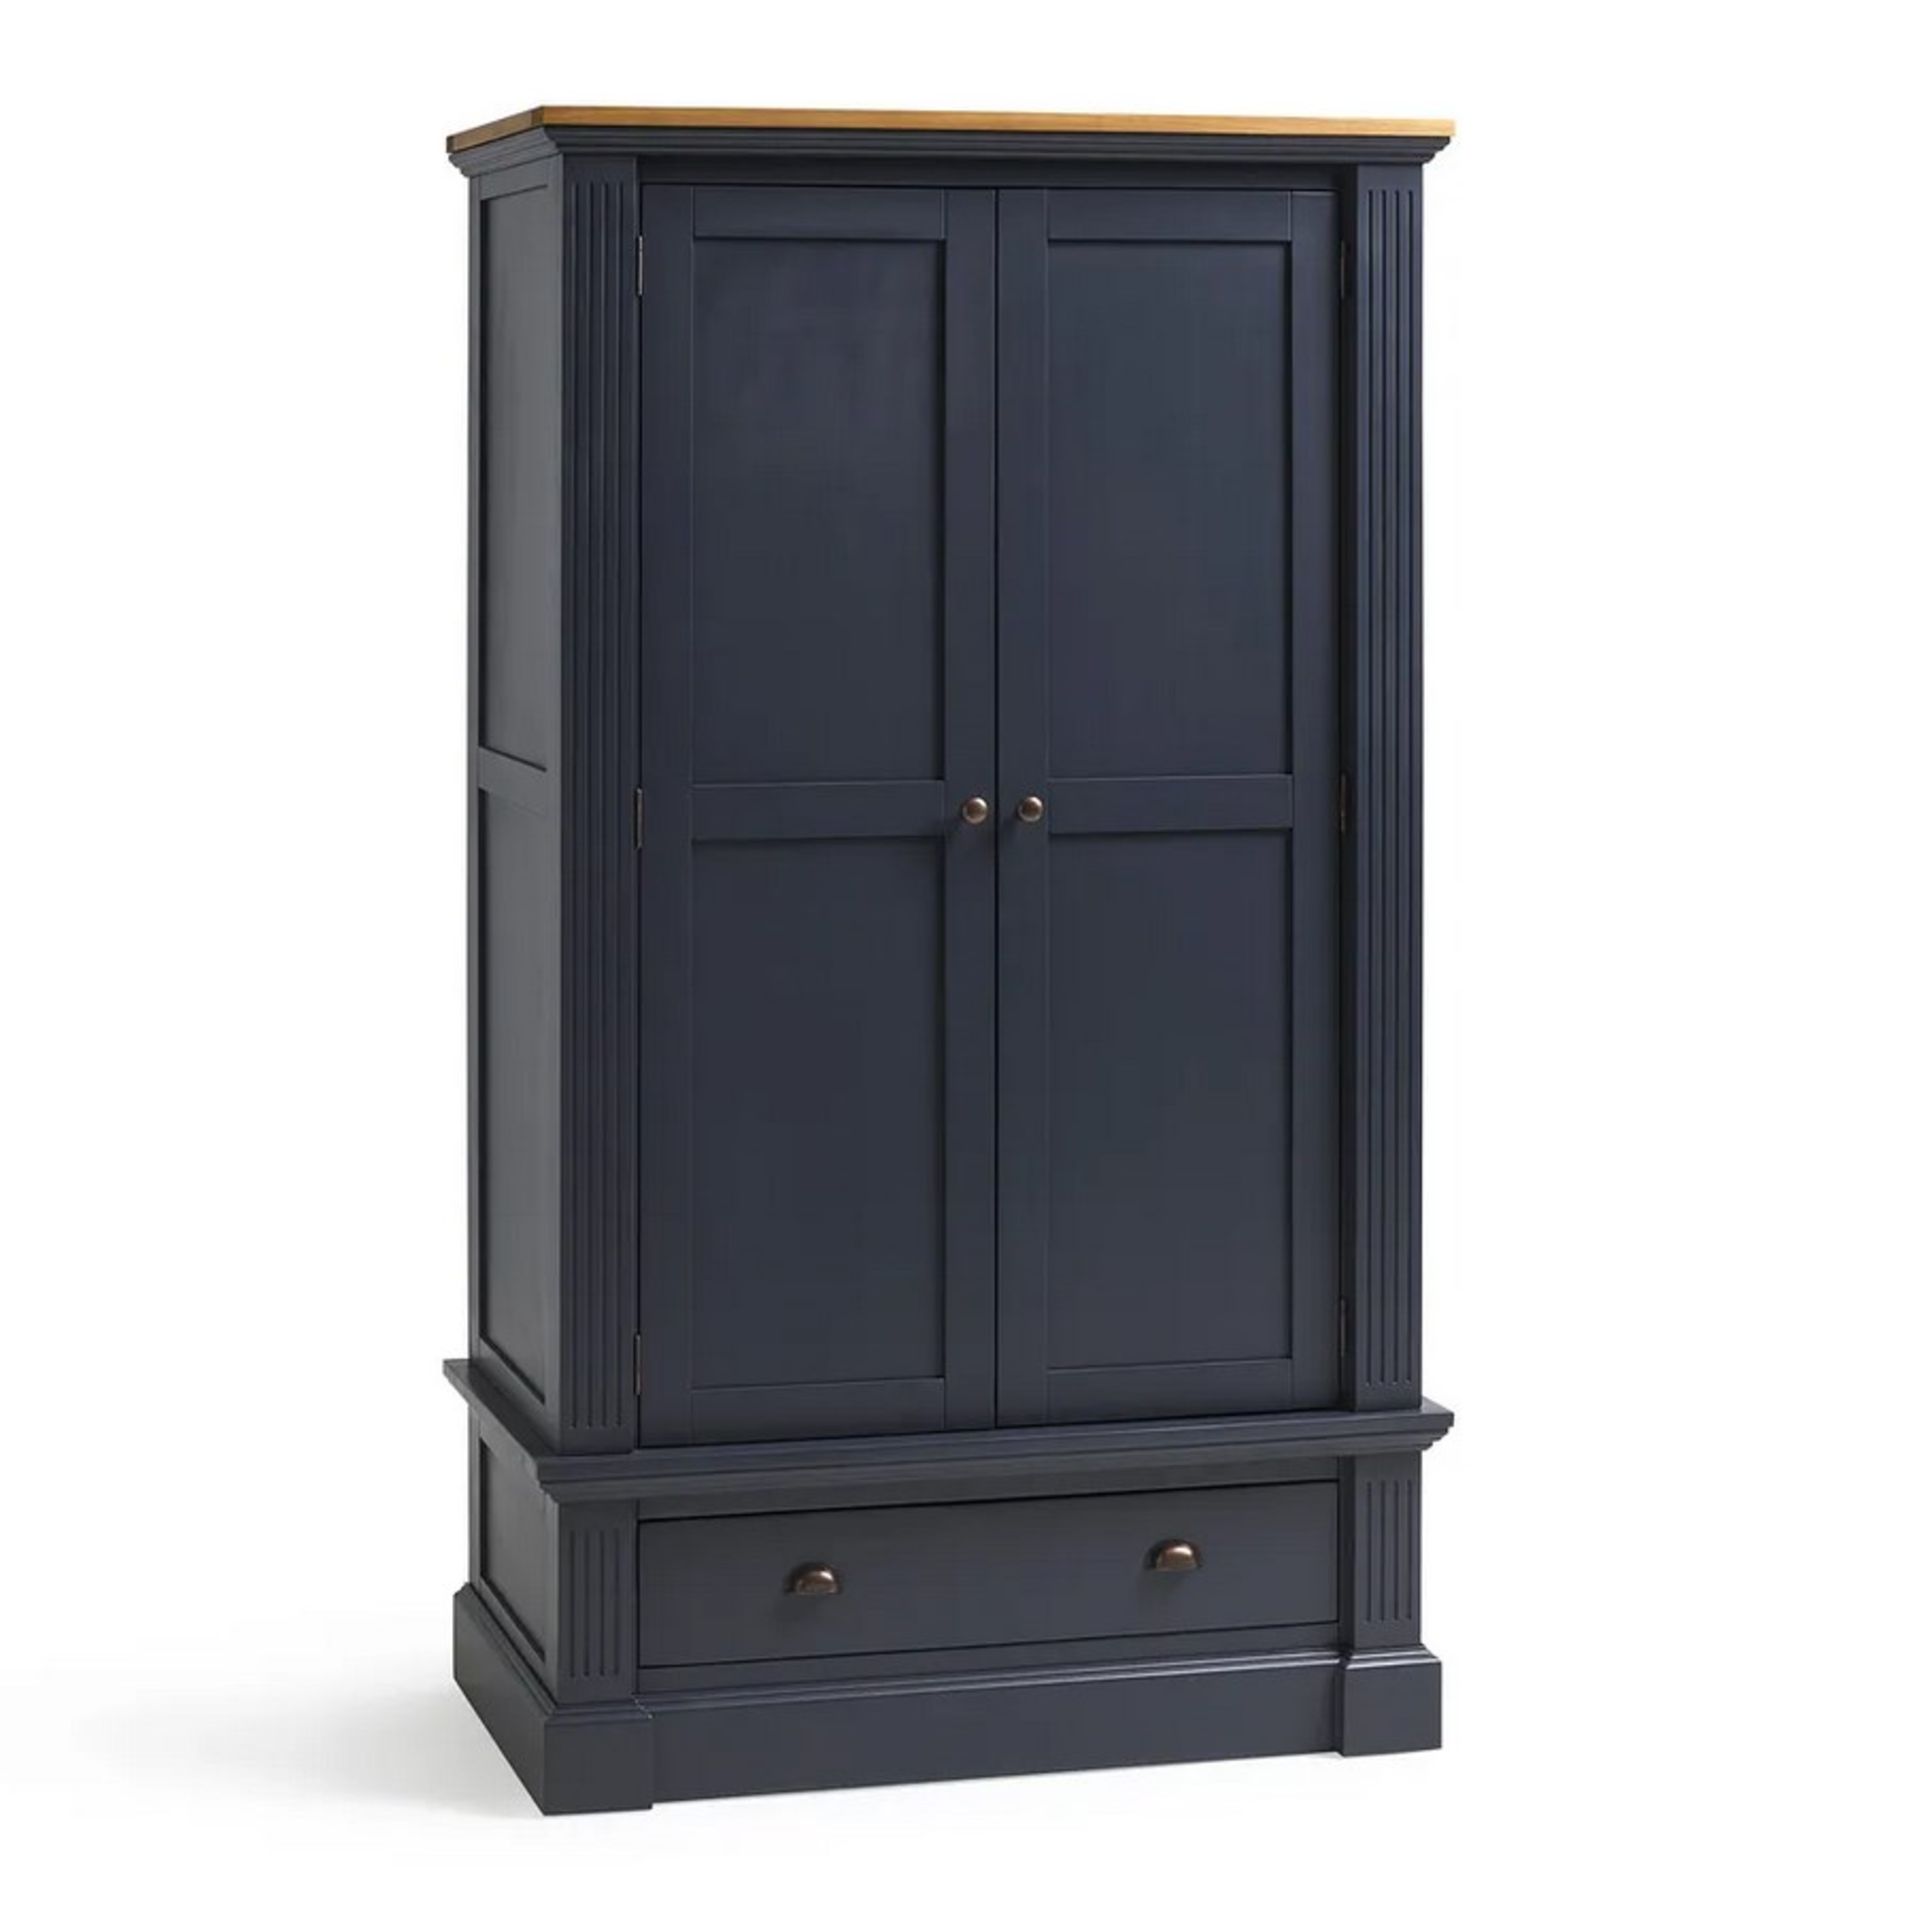 Highgate Rustic Oak And Painted Double Wardrobe. Dimensions: (H193x W110x D65cm). - Image 3 of 18